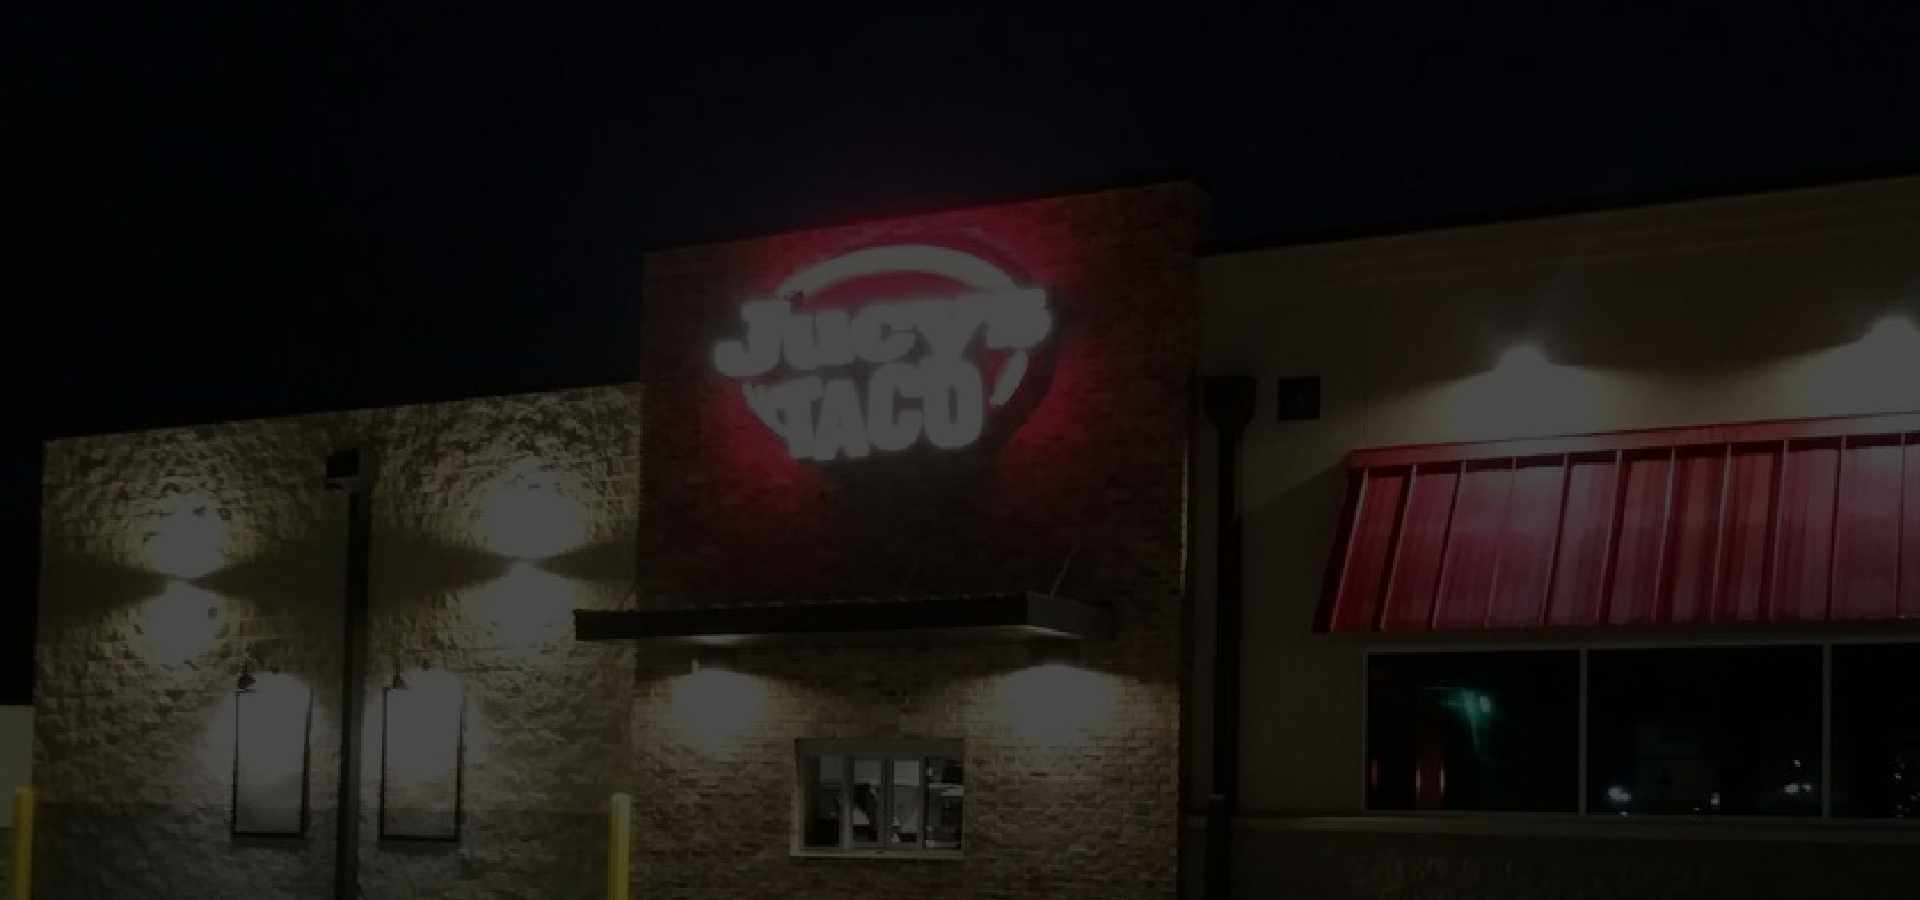 Wildts Wiring has worked with Jucys Taco!